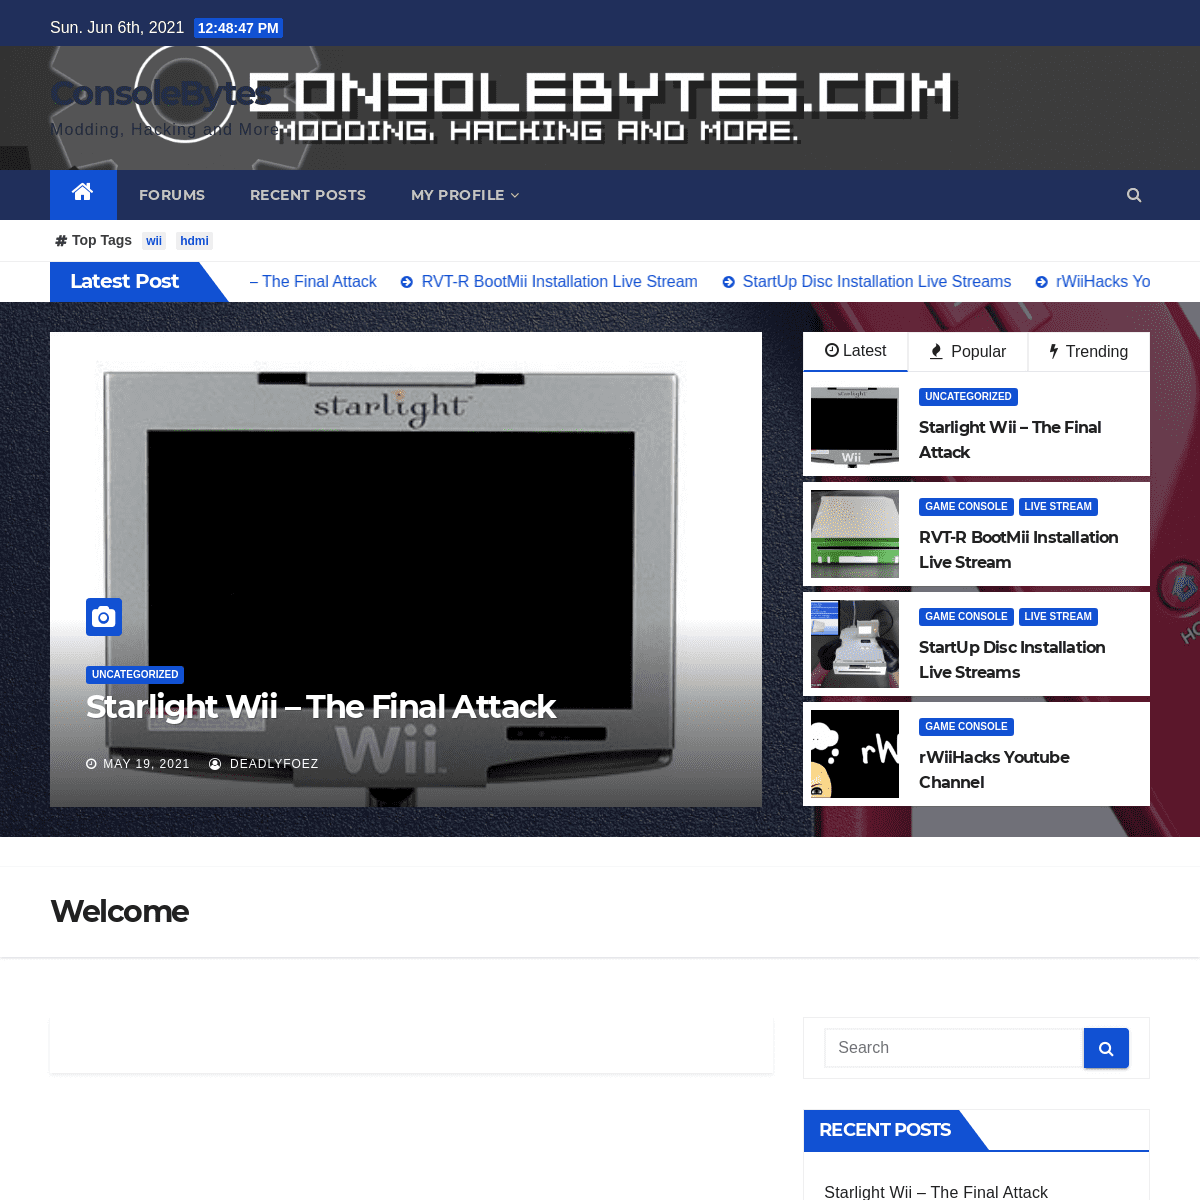 A complete backup of https://consolebytes.com